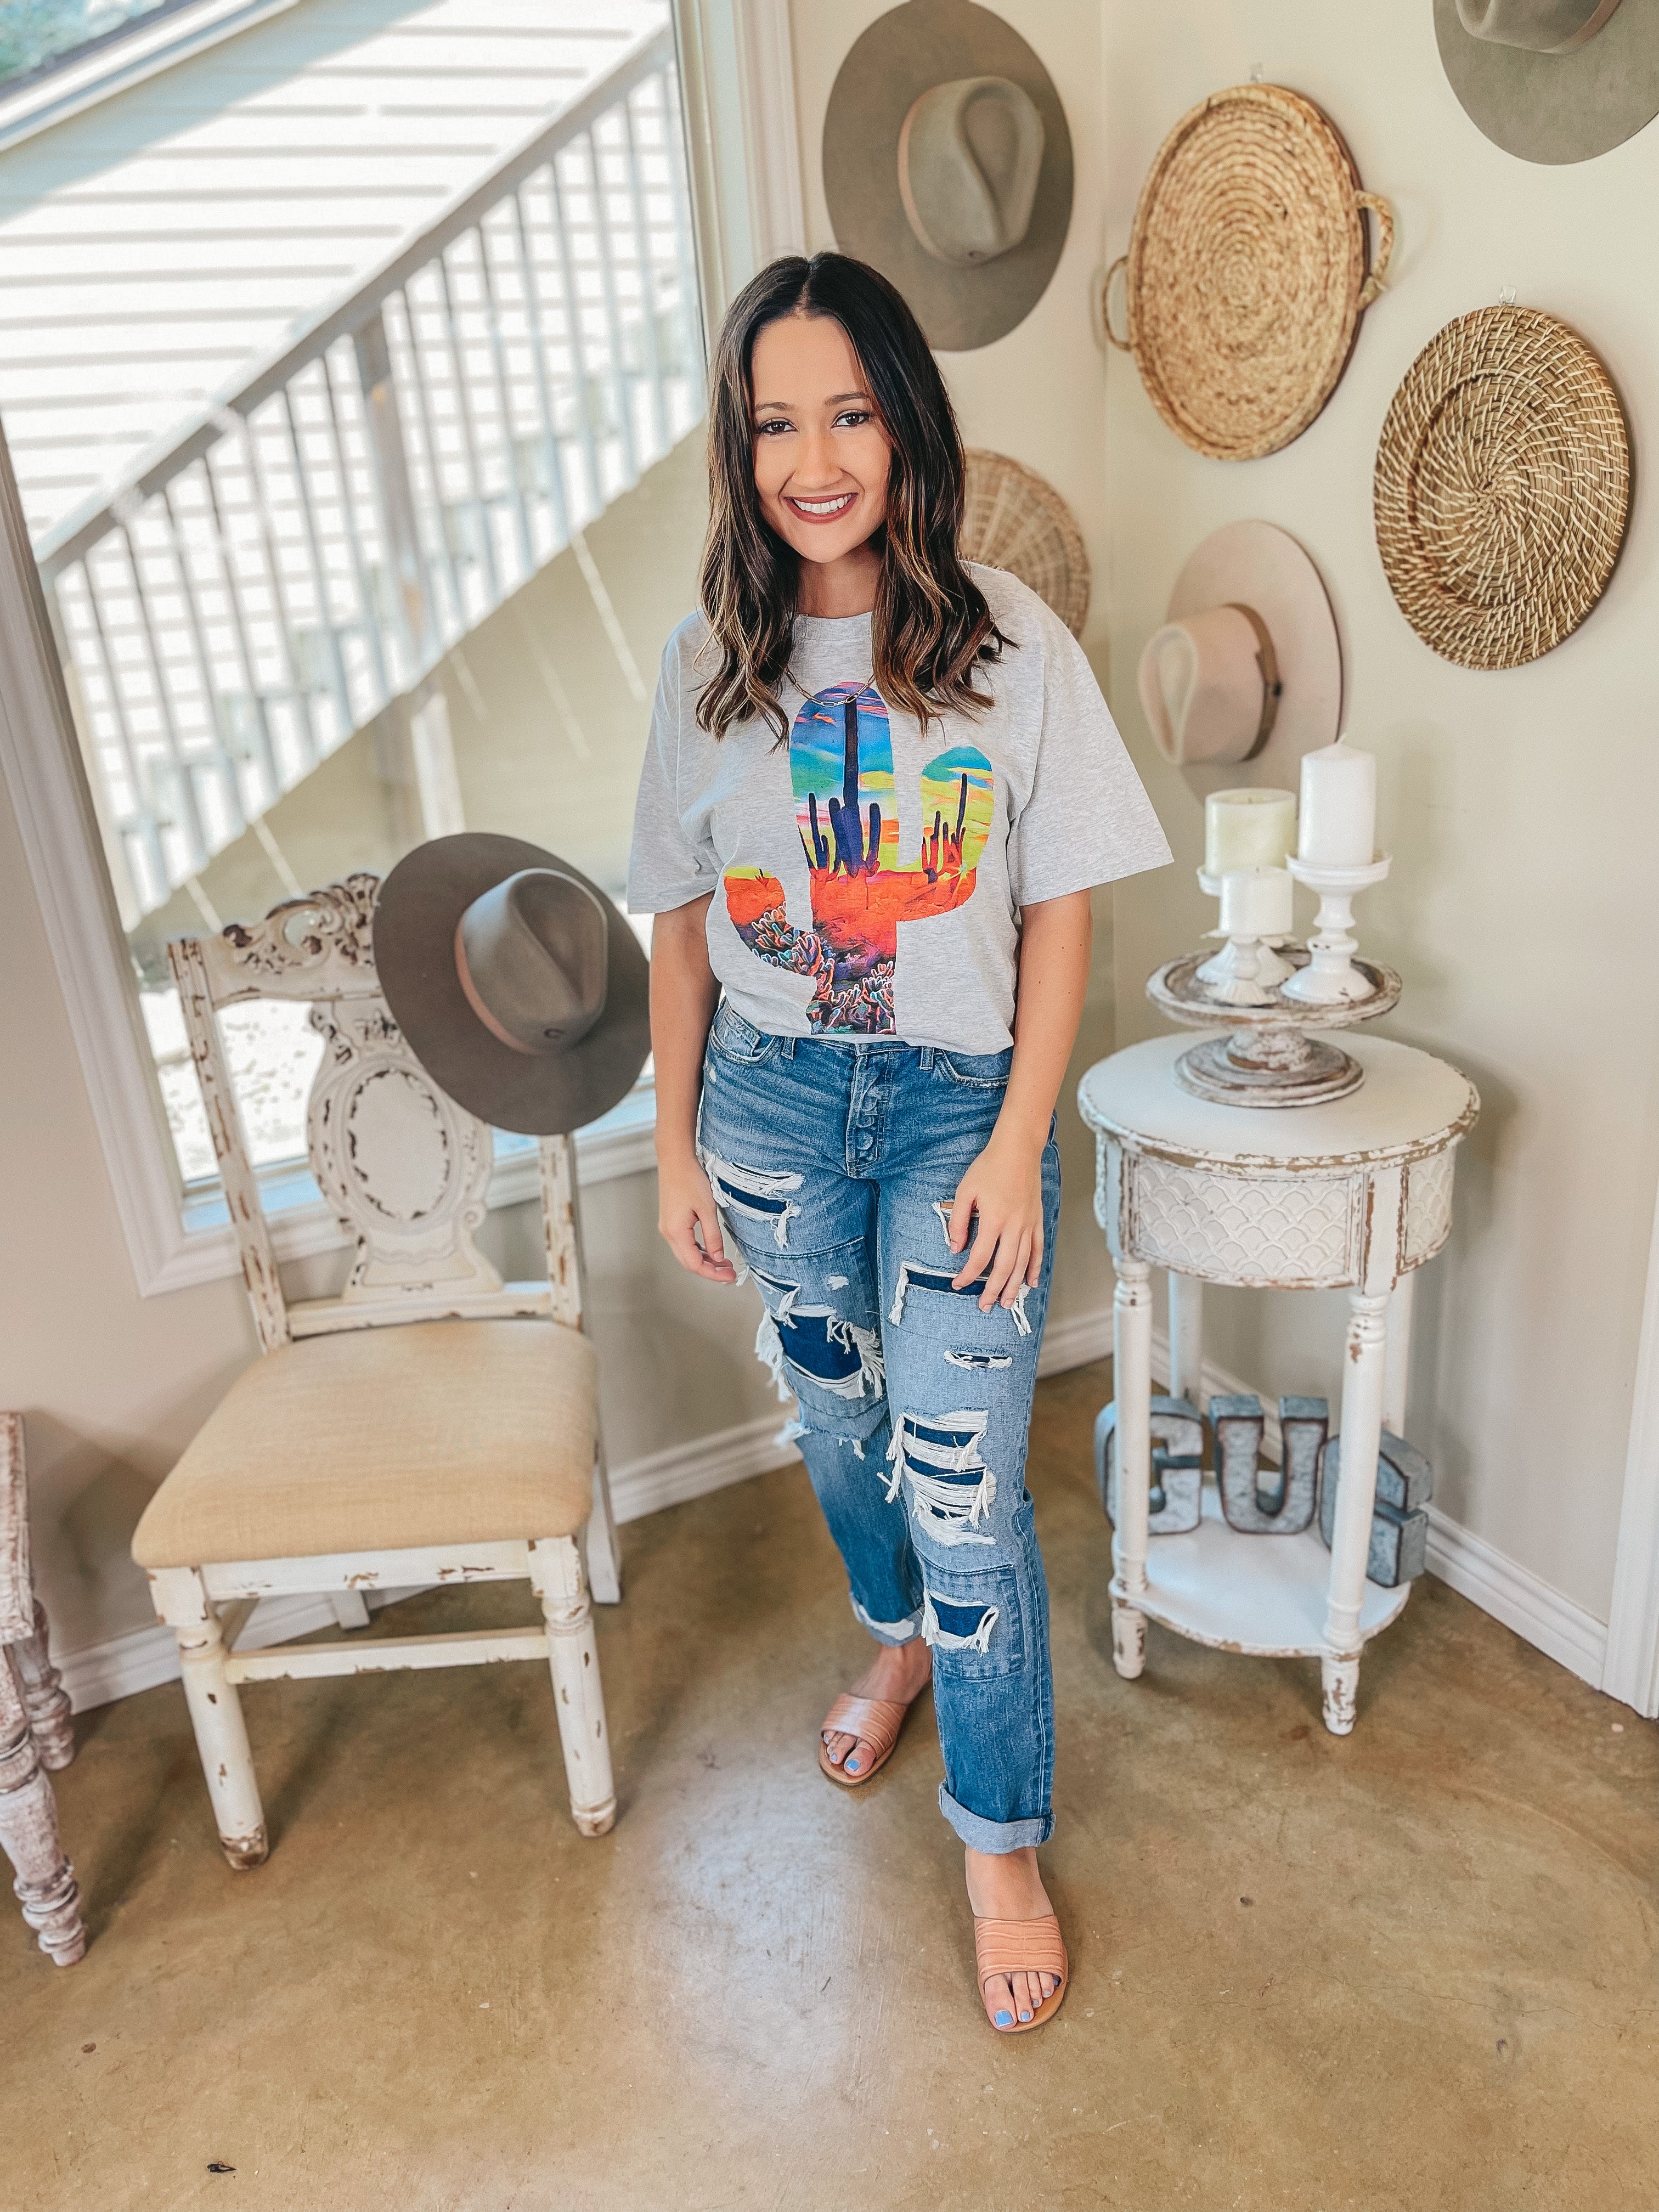 Painted Desert Saguaro Short Sleeve Graphic Tee in Heather Grey - Giddy Up Glamour Boutique